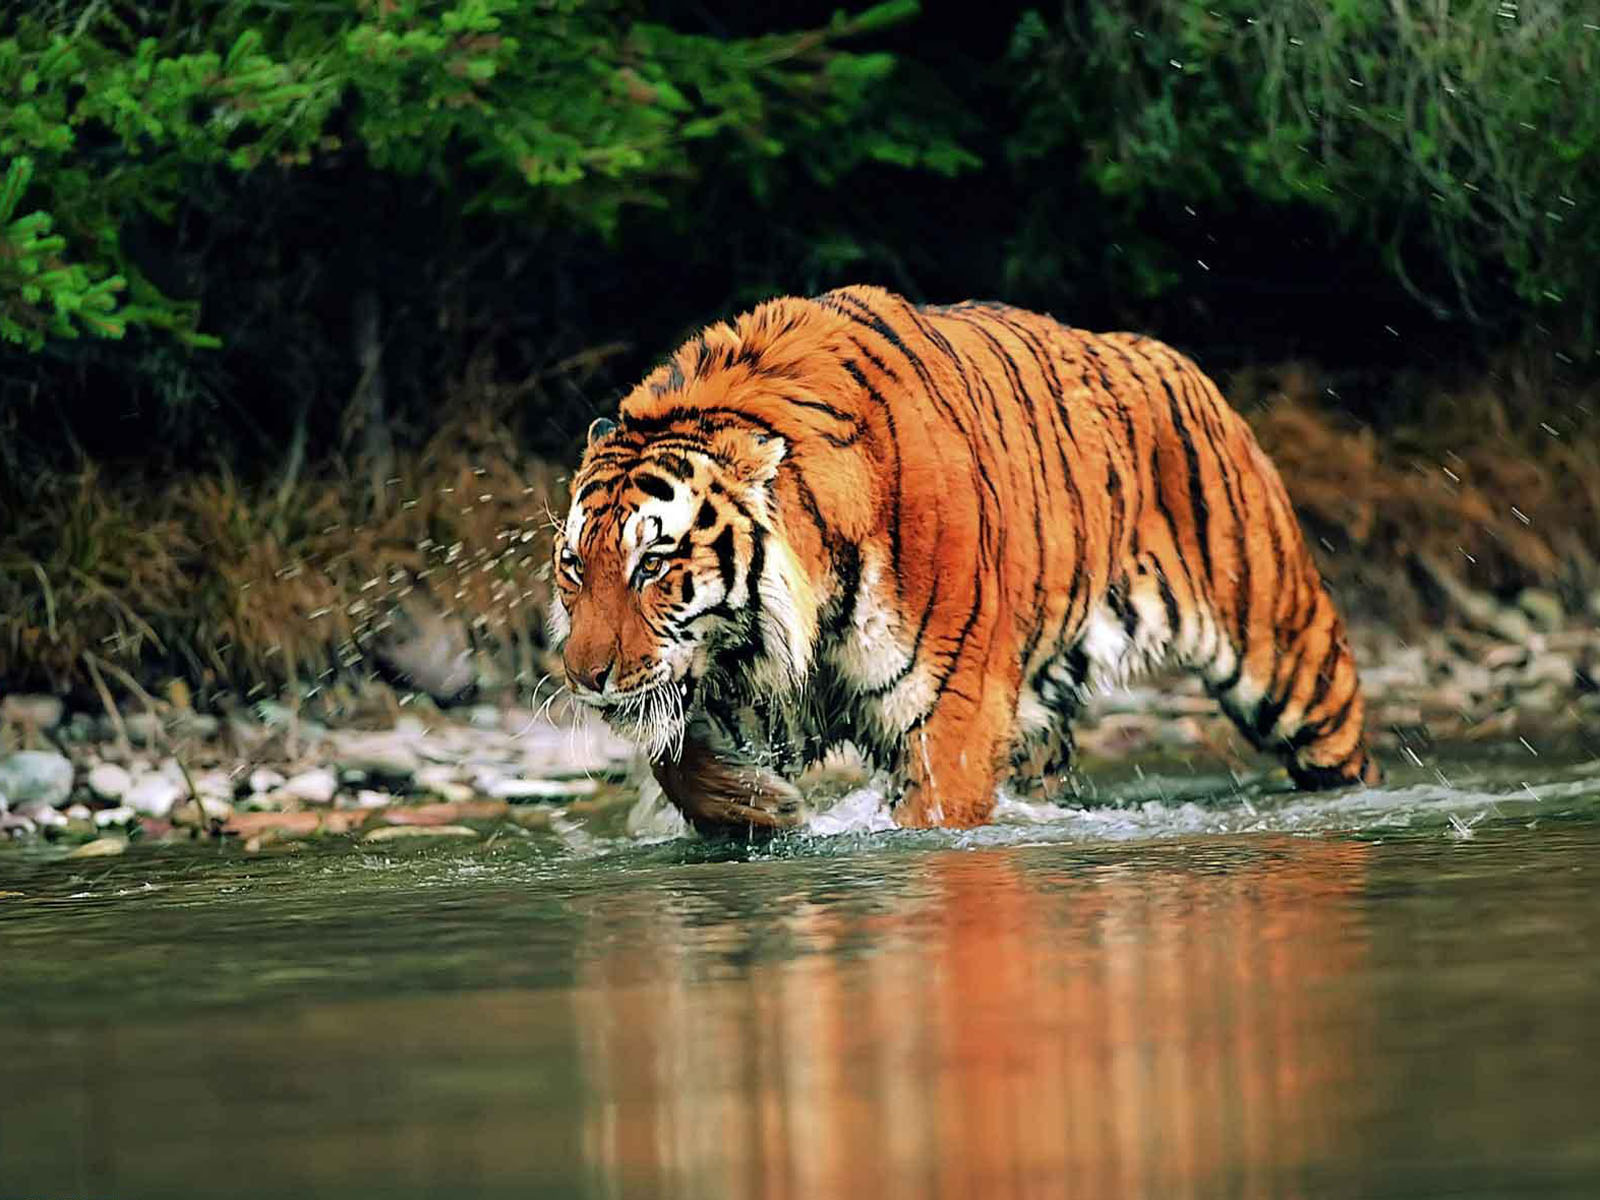 Search Results for hd wallpapers 19201080 tiger  Adorable Wallpapers   Tiger images Tiger pictures Tiger wallpaper